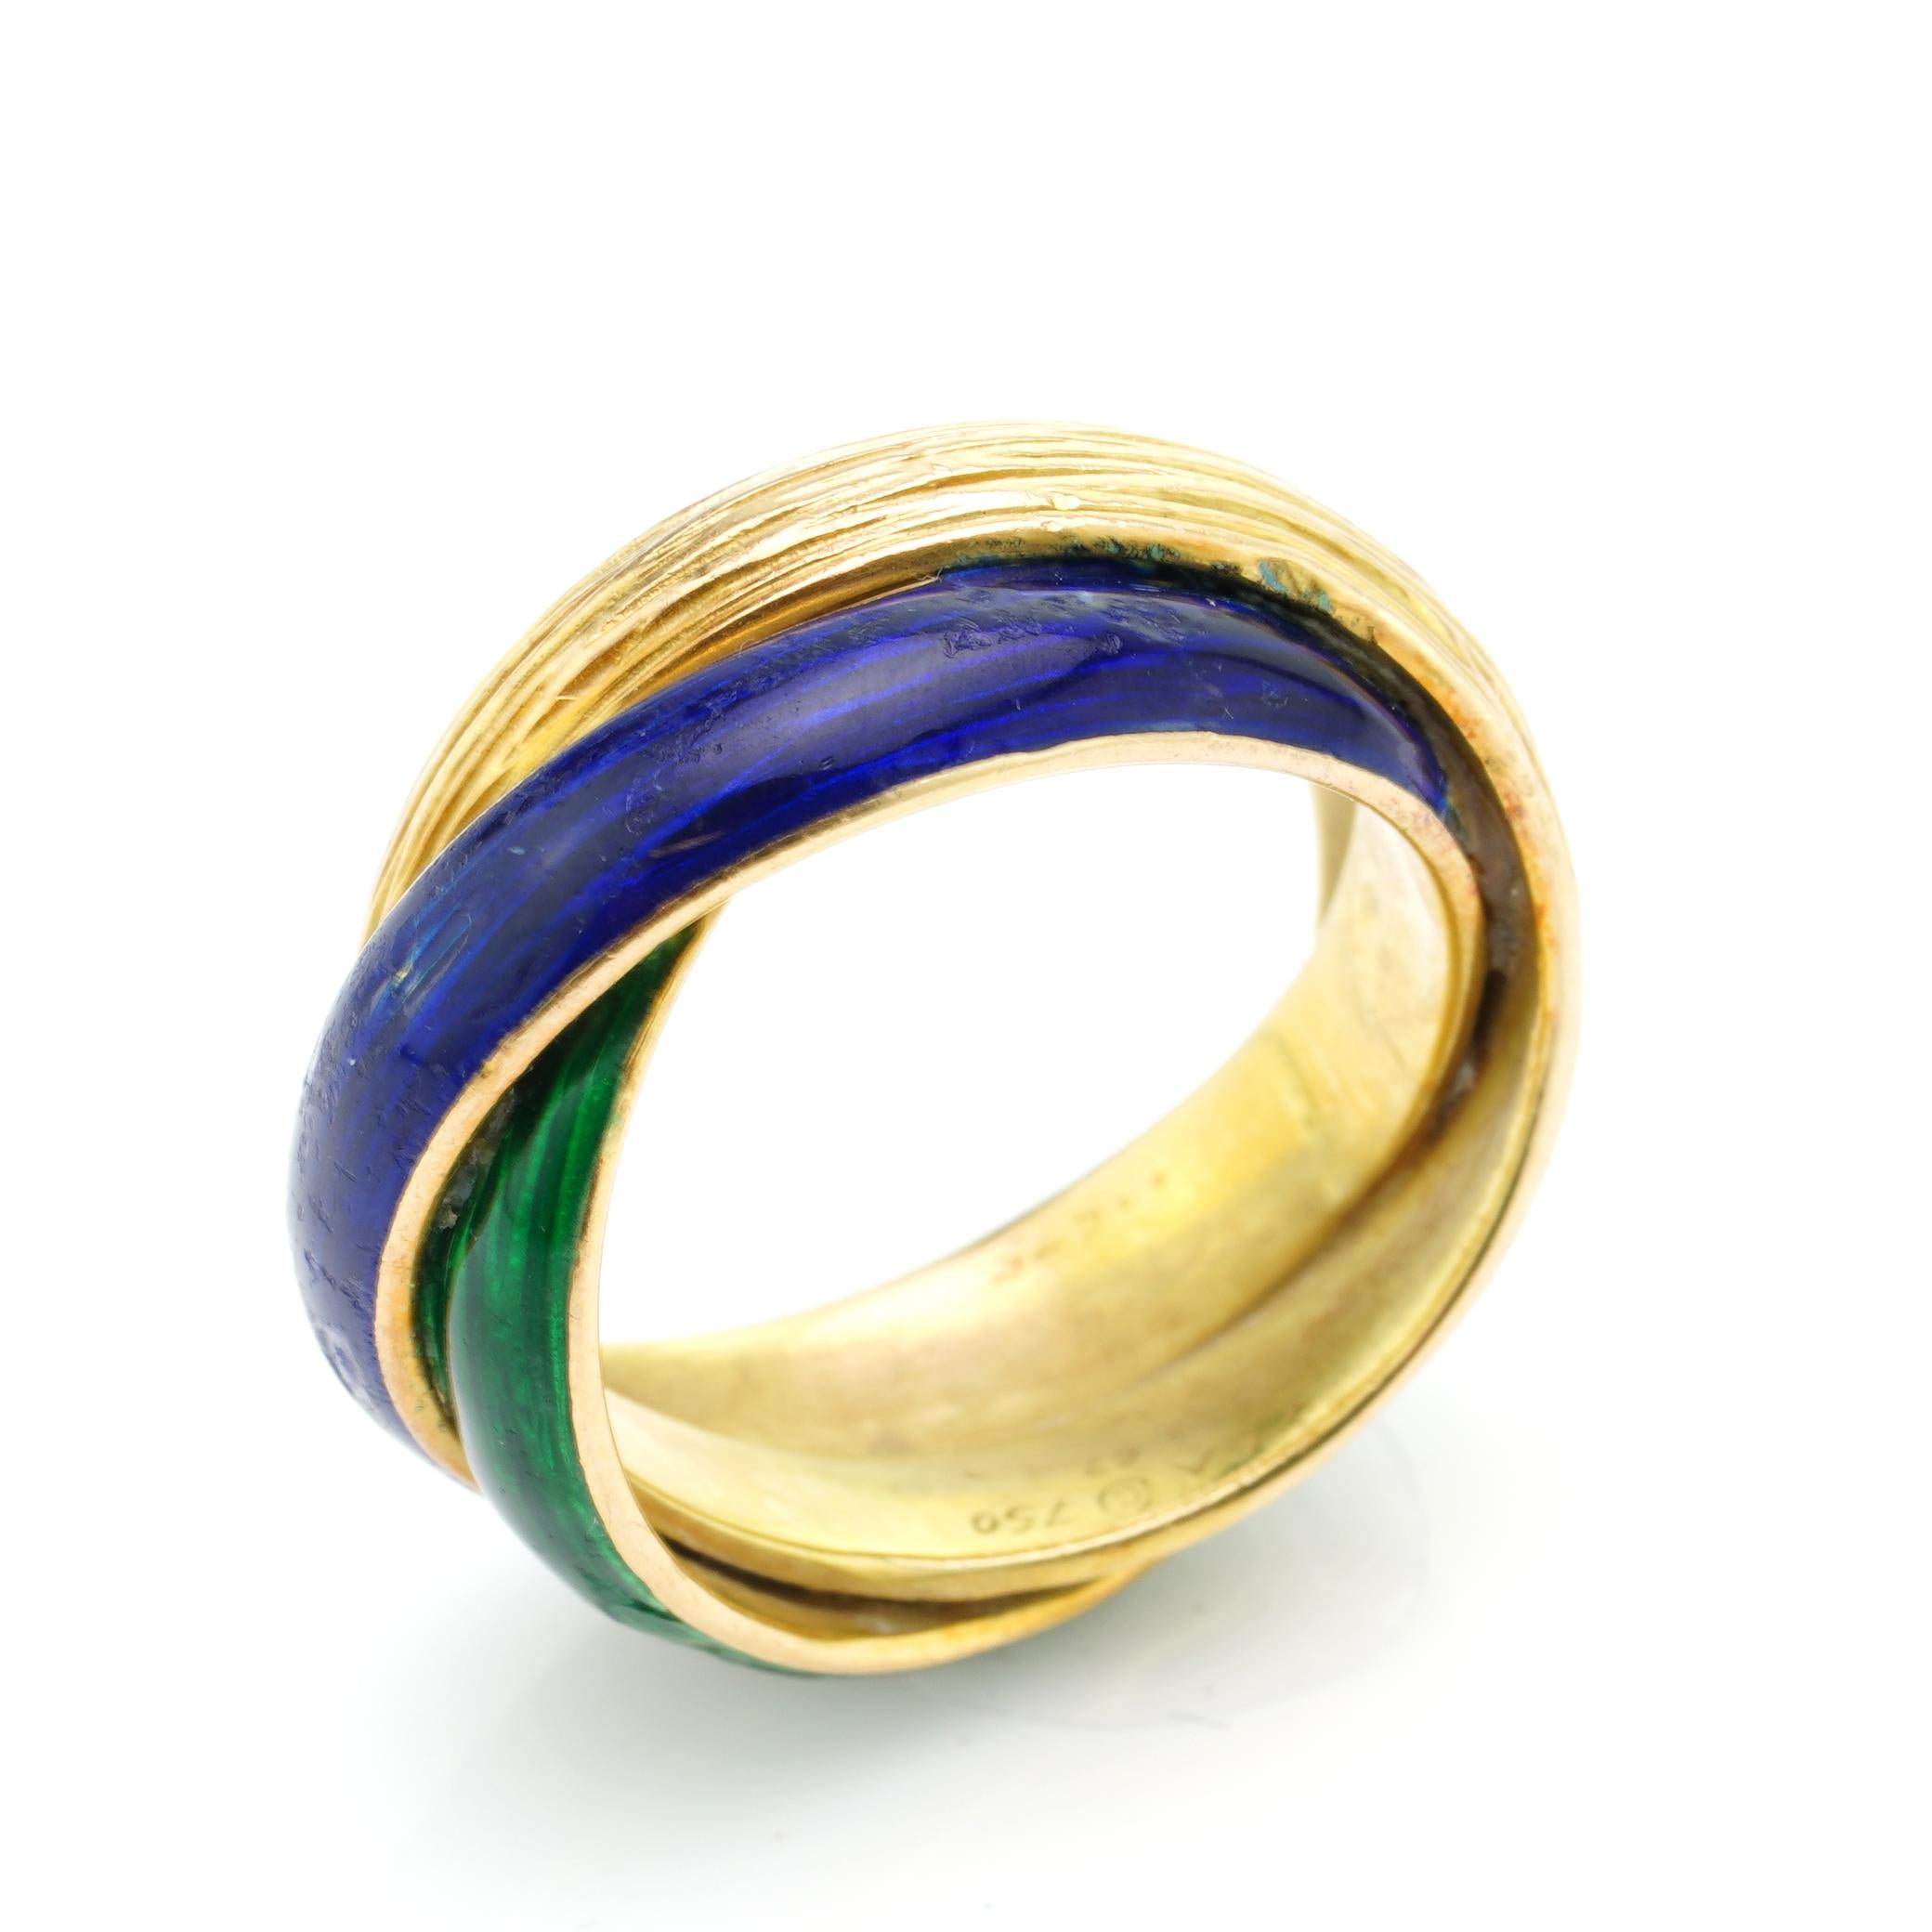 Women's Vintage Van Cleef & Arpels 18kt, Yellow Gold, Twisted Red and Blue Enamel Ring